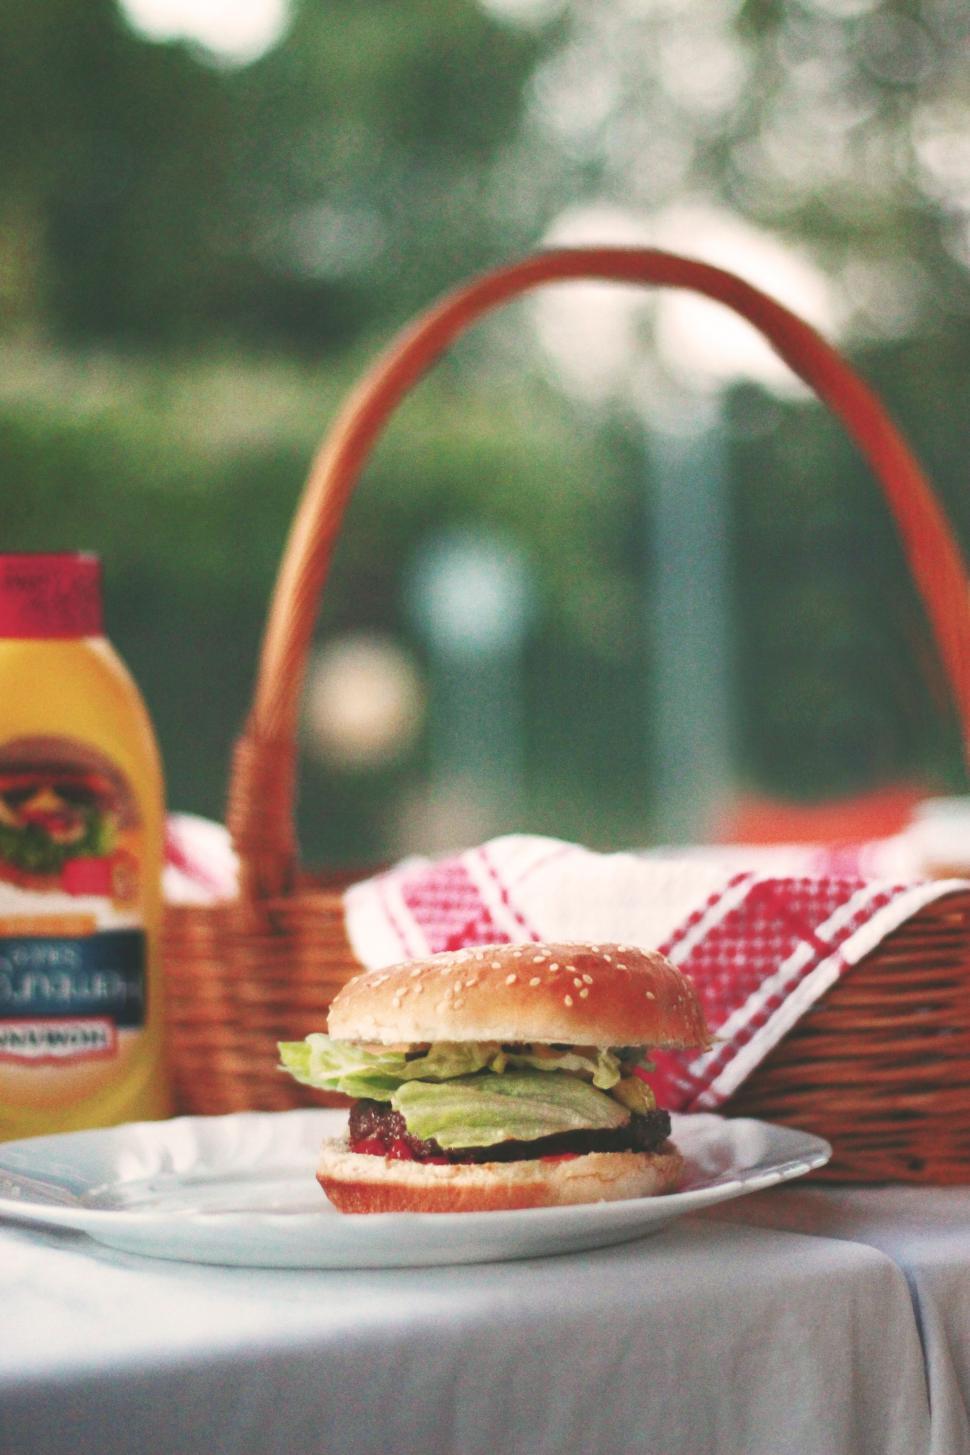 Free Image of Sandwich and Mustard Bottle on Table 